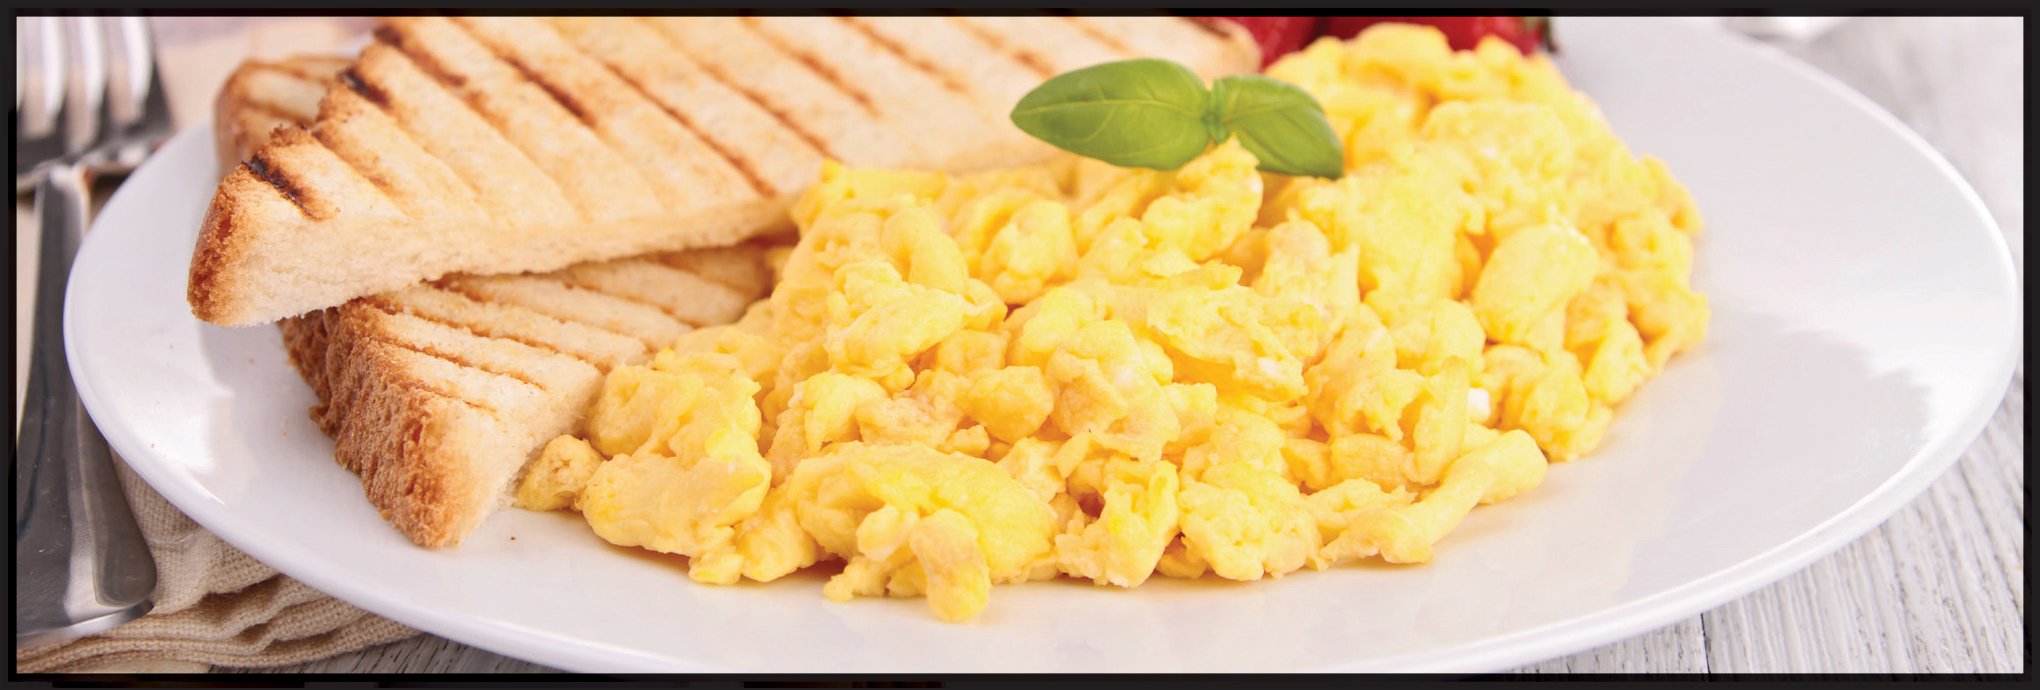 eggs-remain-a-staple-in-breakfast-food-trends